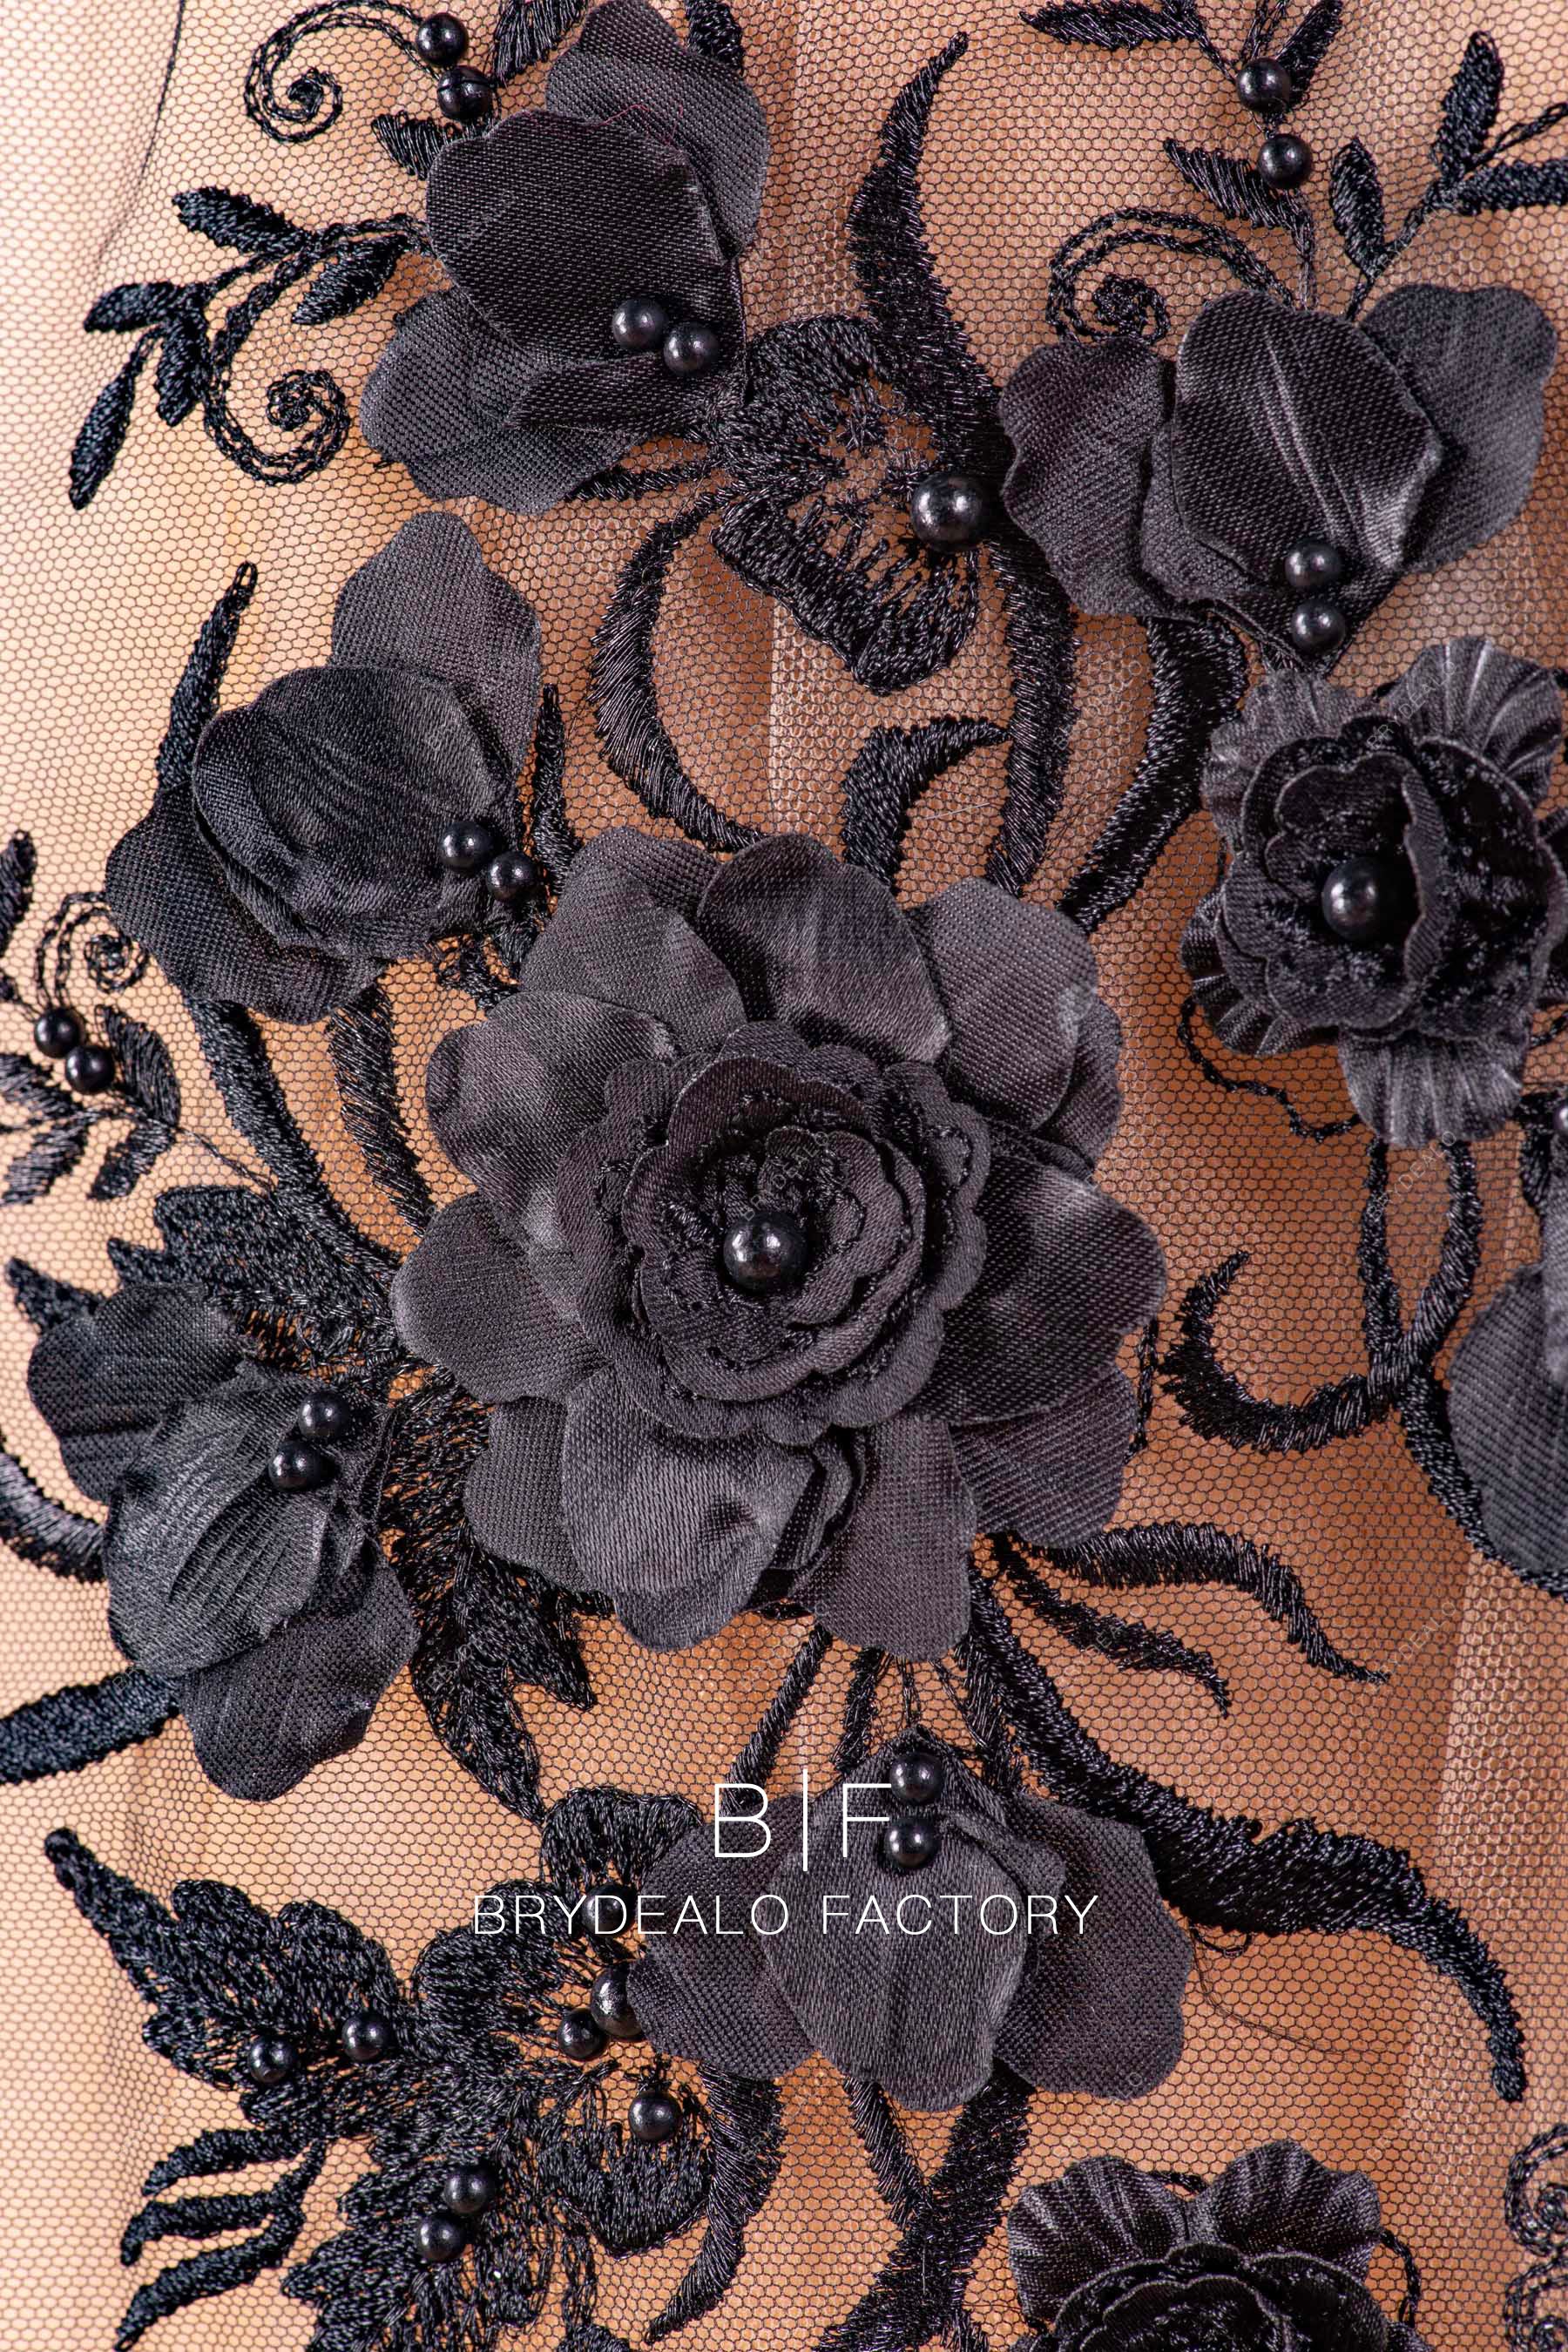 Black 3D Floral Embroidered Lace on a Black Netting, Black Lace Fabric 